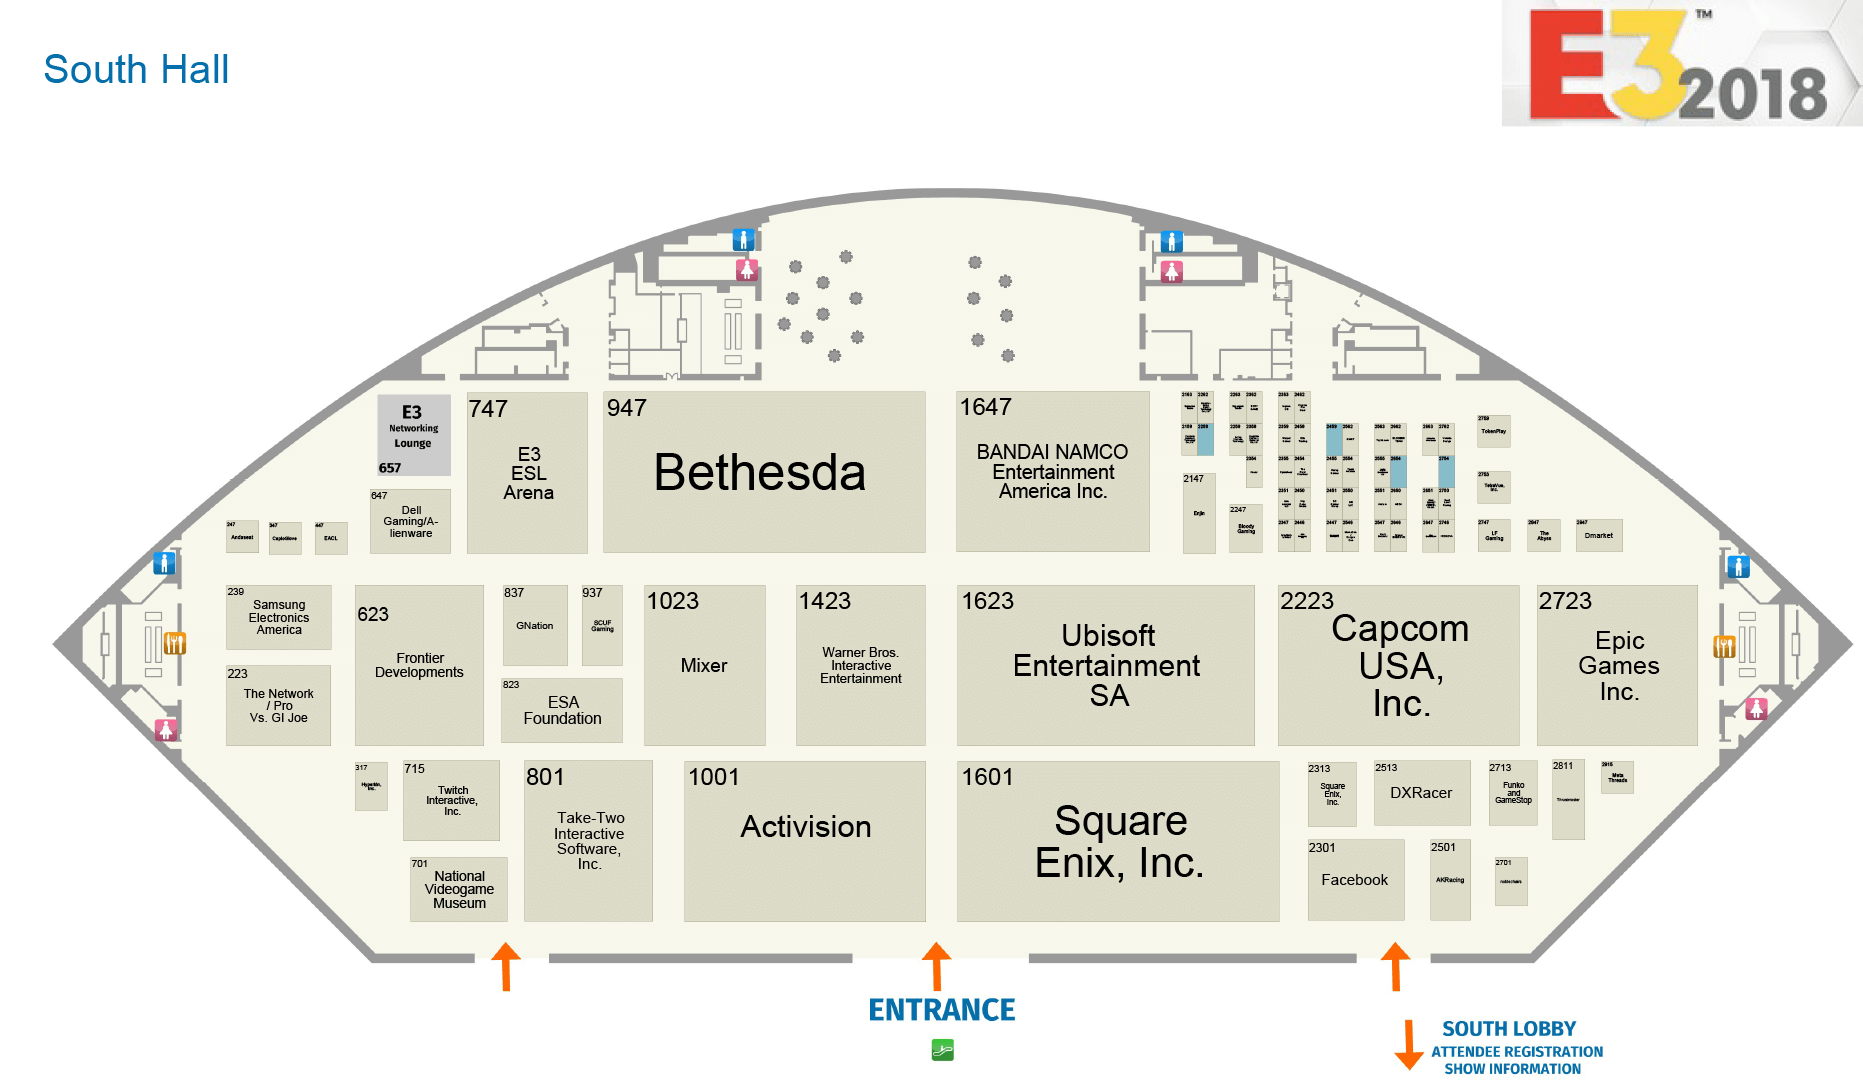 E3 2018 finalized floor plans now available ResetEra